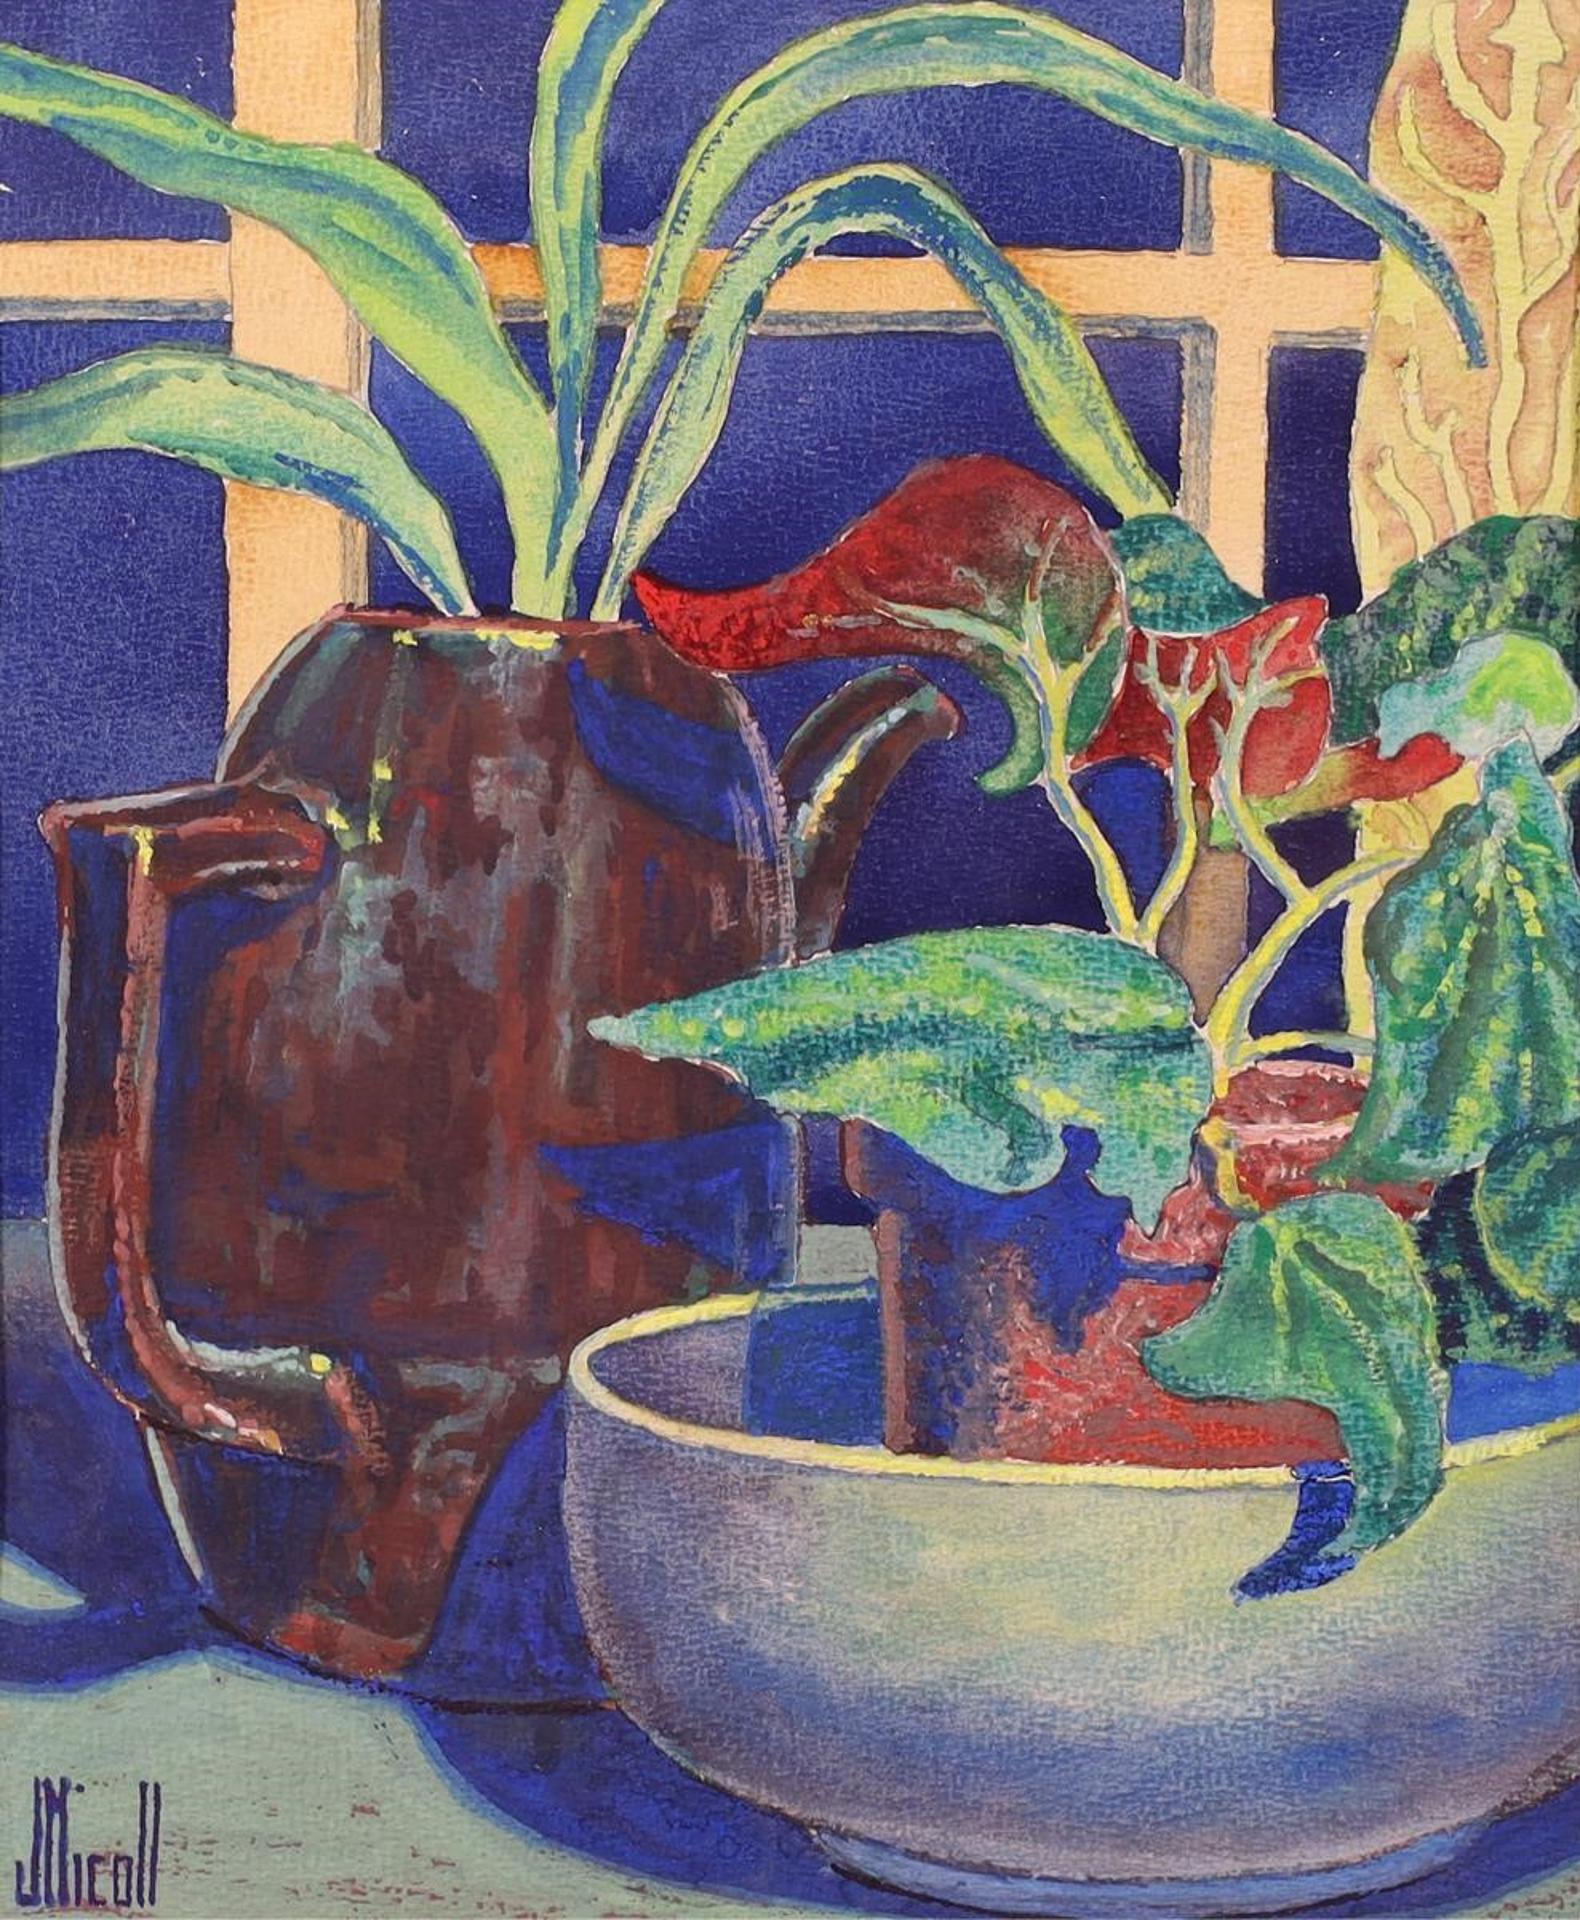 James Mclaren Jim Nicoll (1892-1986) - Still Life With Potted Plants